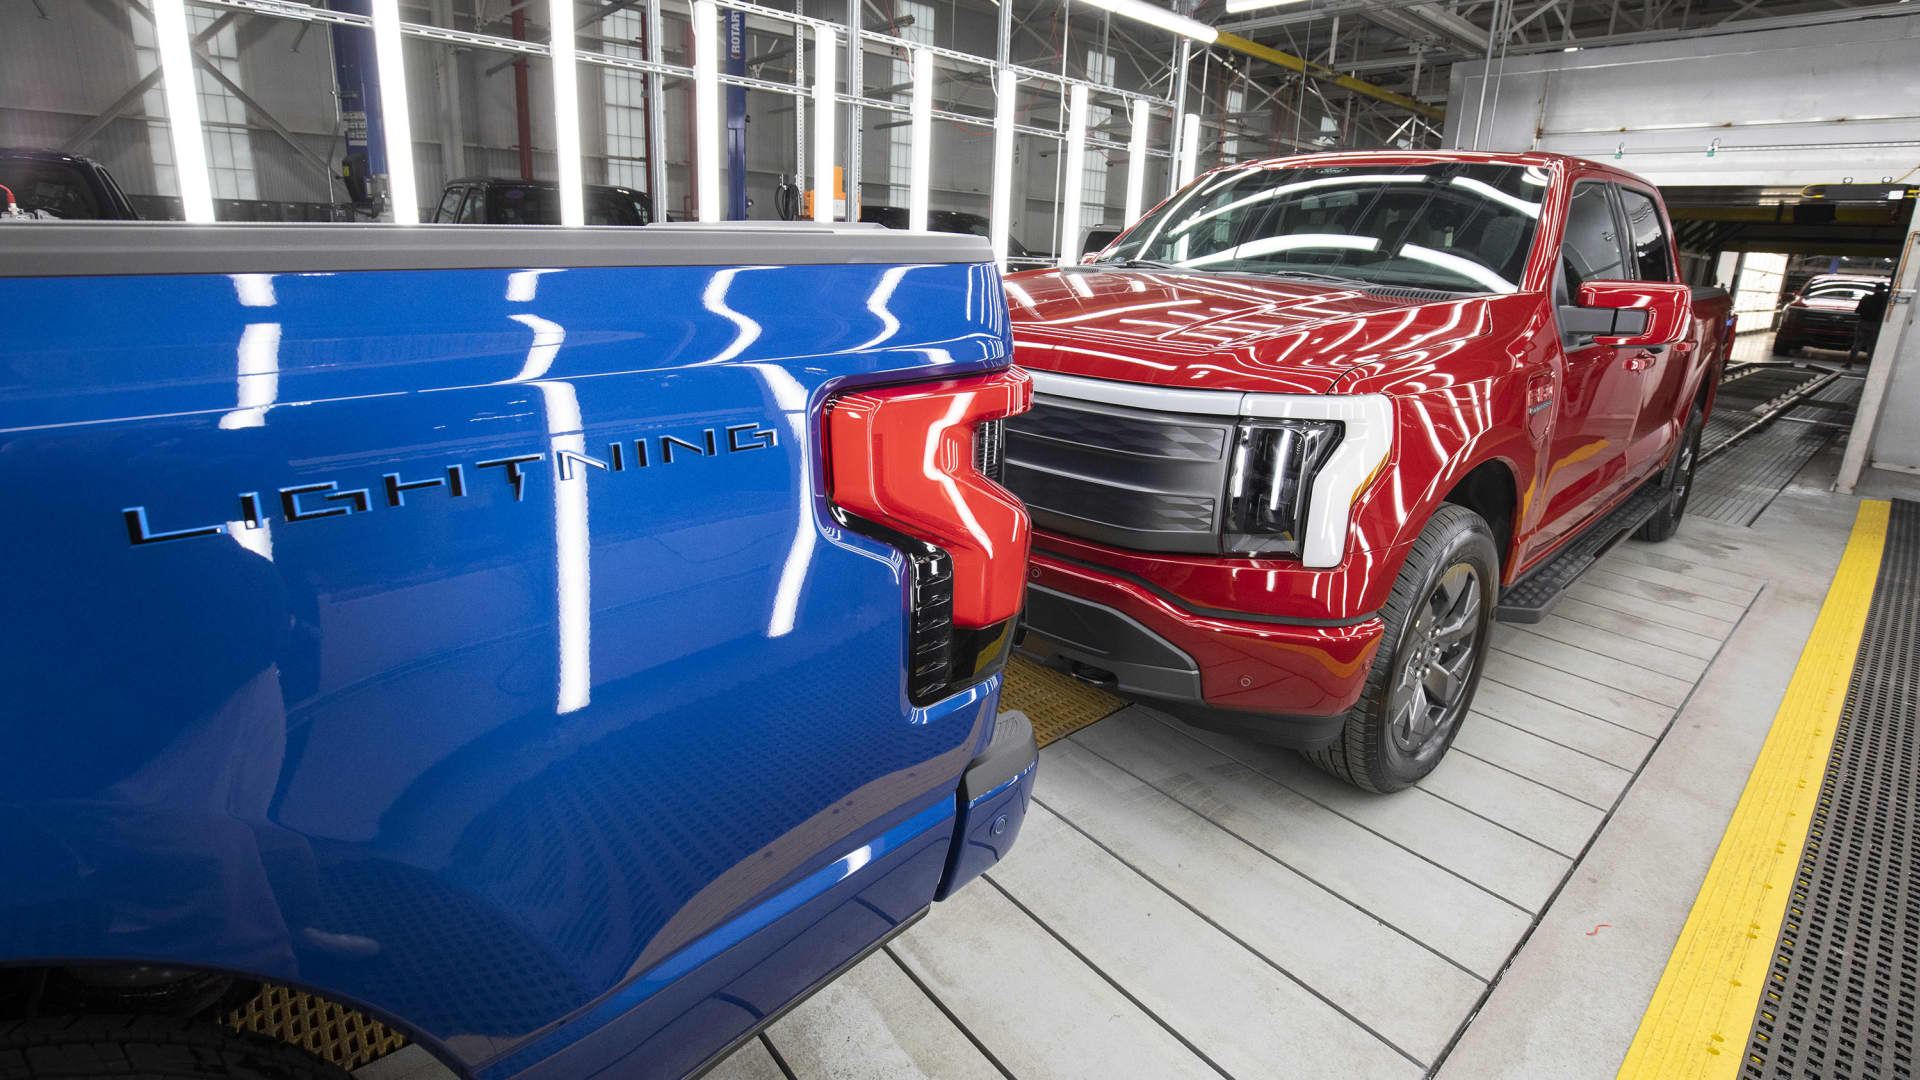 Ford ups starting price of electric F-150 Lightning pickup to $51,974